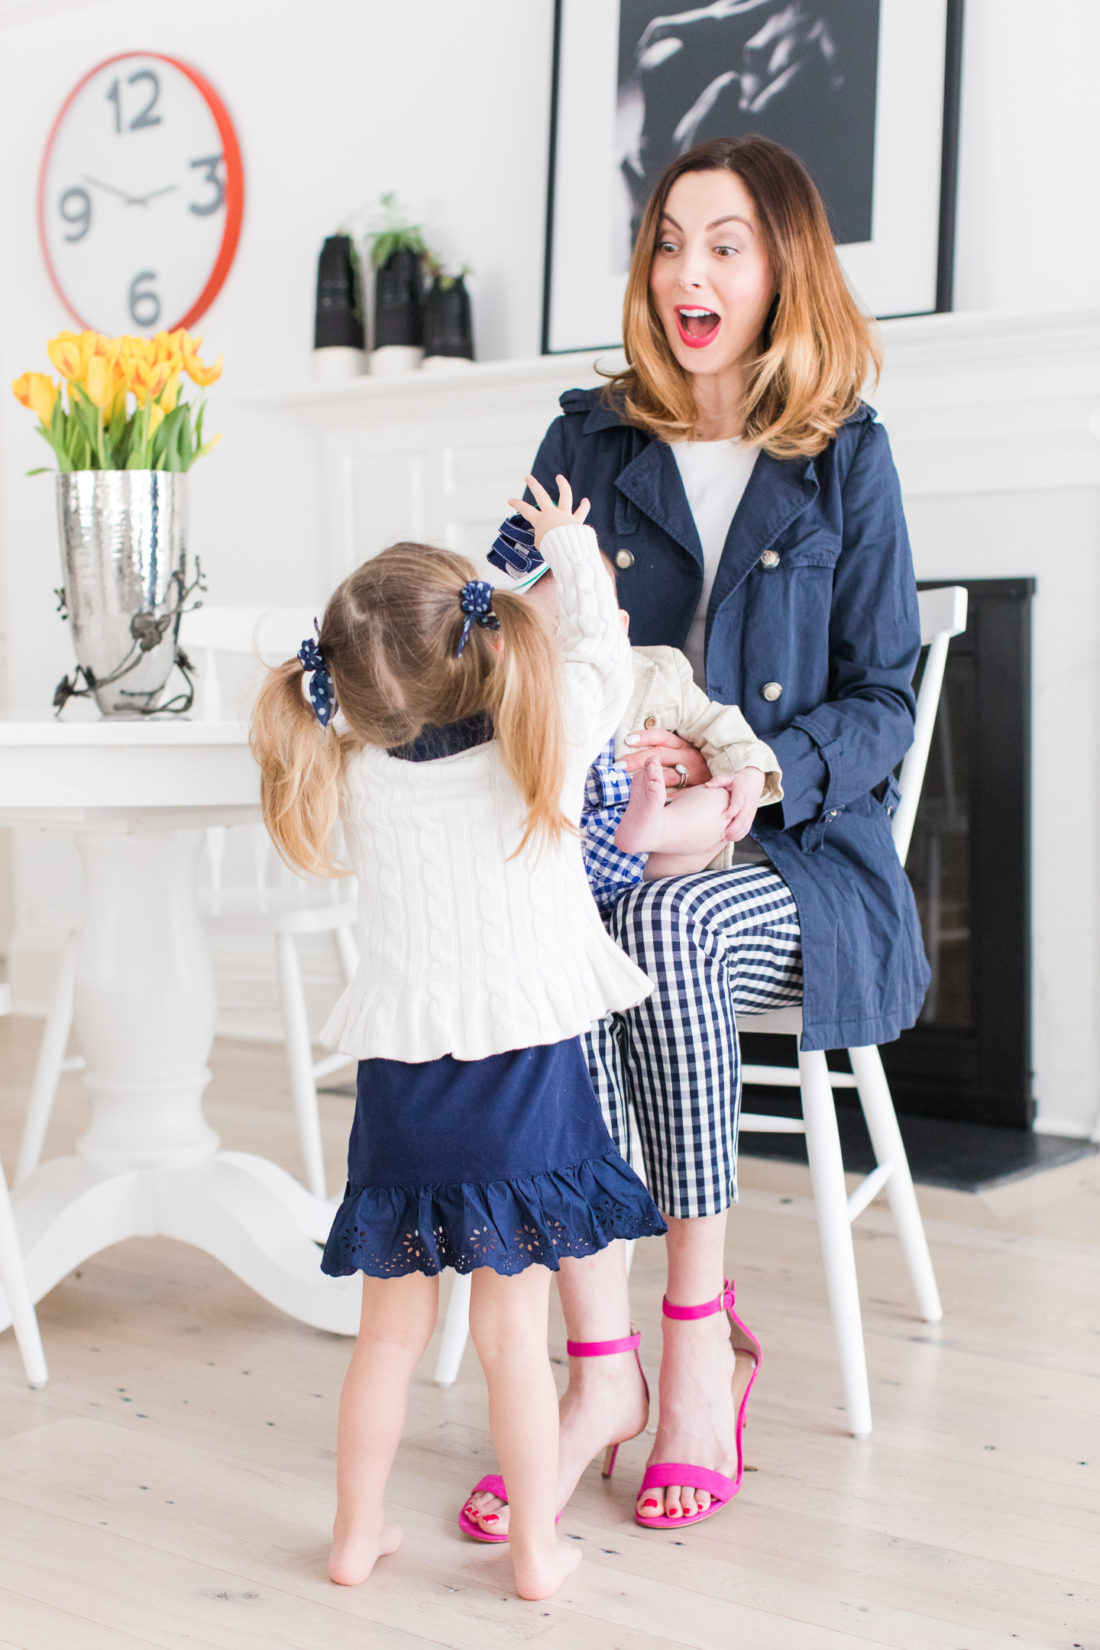 Eva Amurri Martino sits with her daughter Marlowe and son Major in the kitchen of their Connecticut home wearing coordinating navy and white outfits